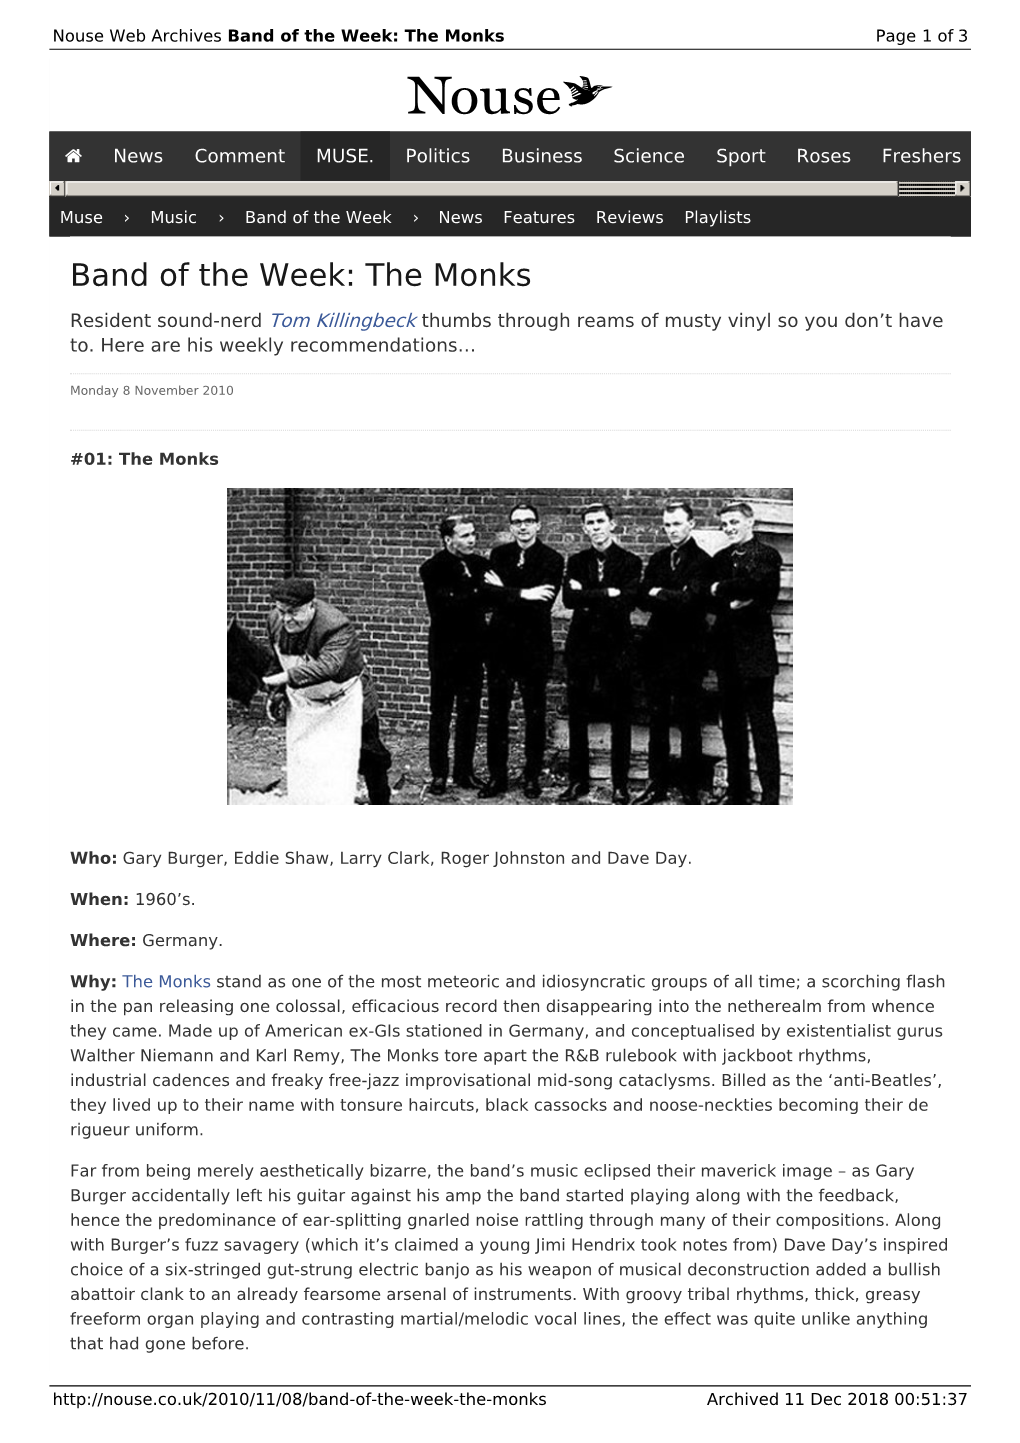 Band of the Week: the Monks | Nouse